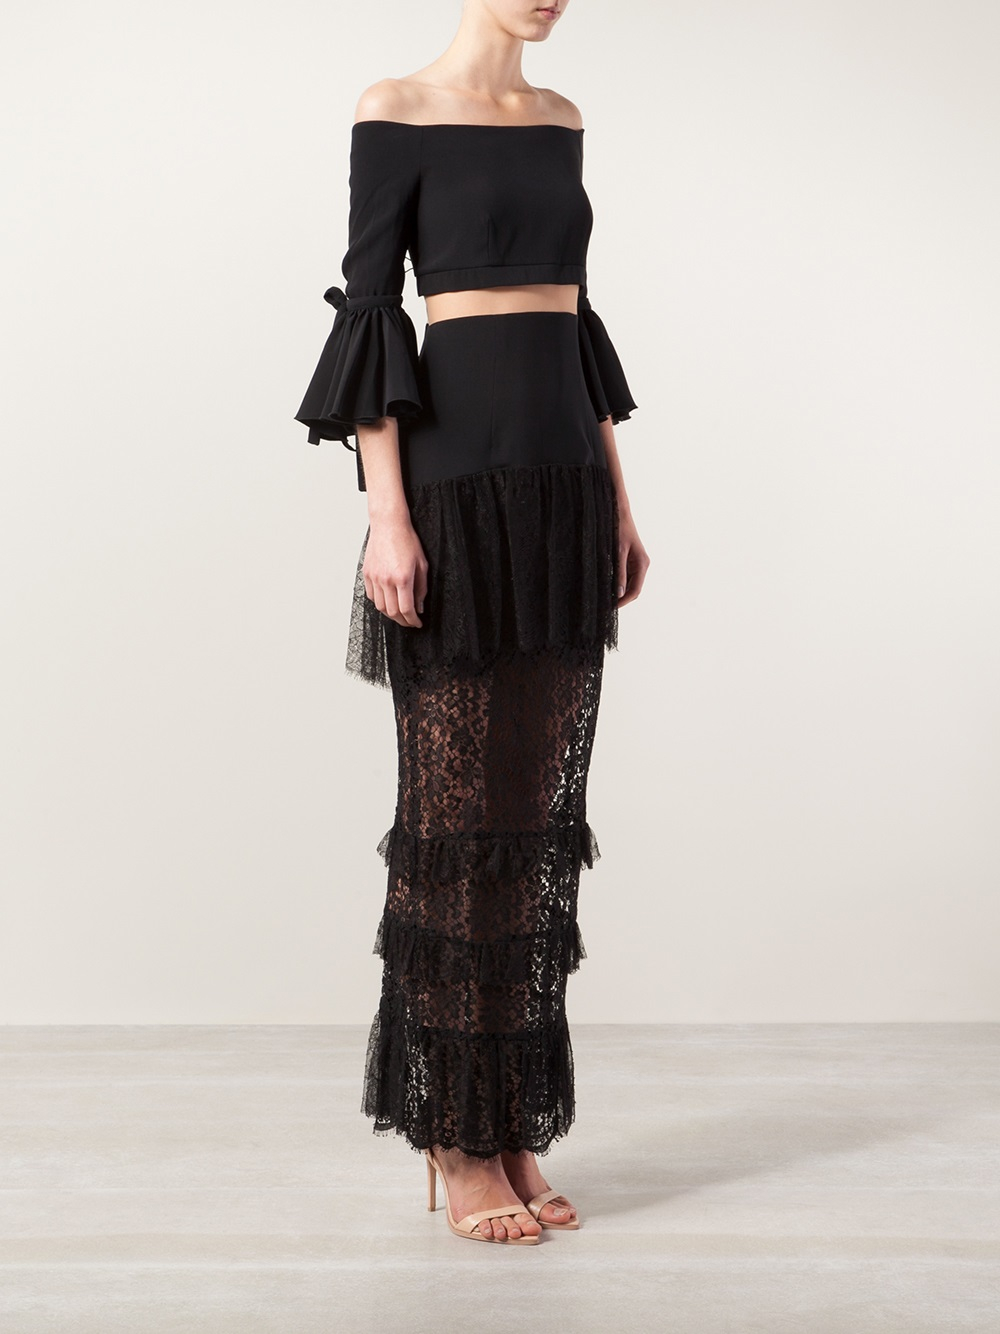 Lyst - Alessandra rich Stretchsilk Crepe and Lace Gown in Black